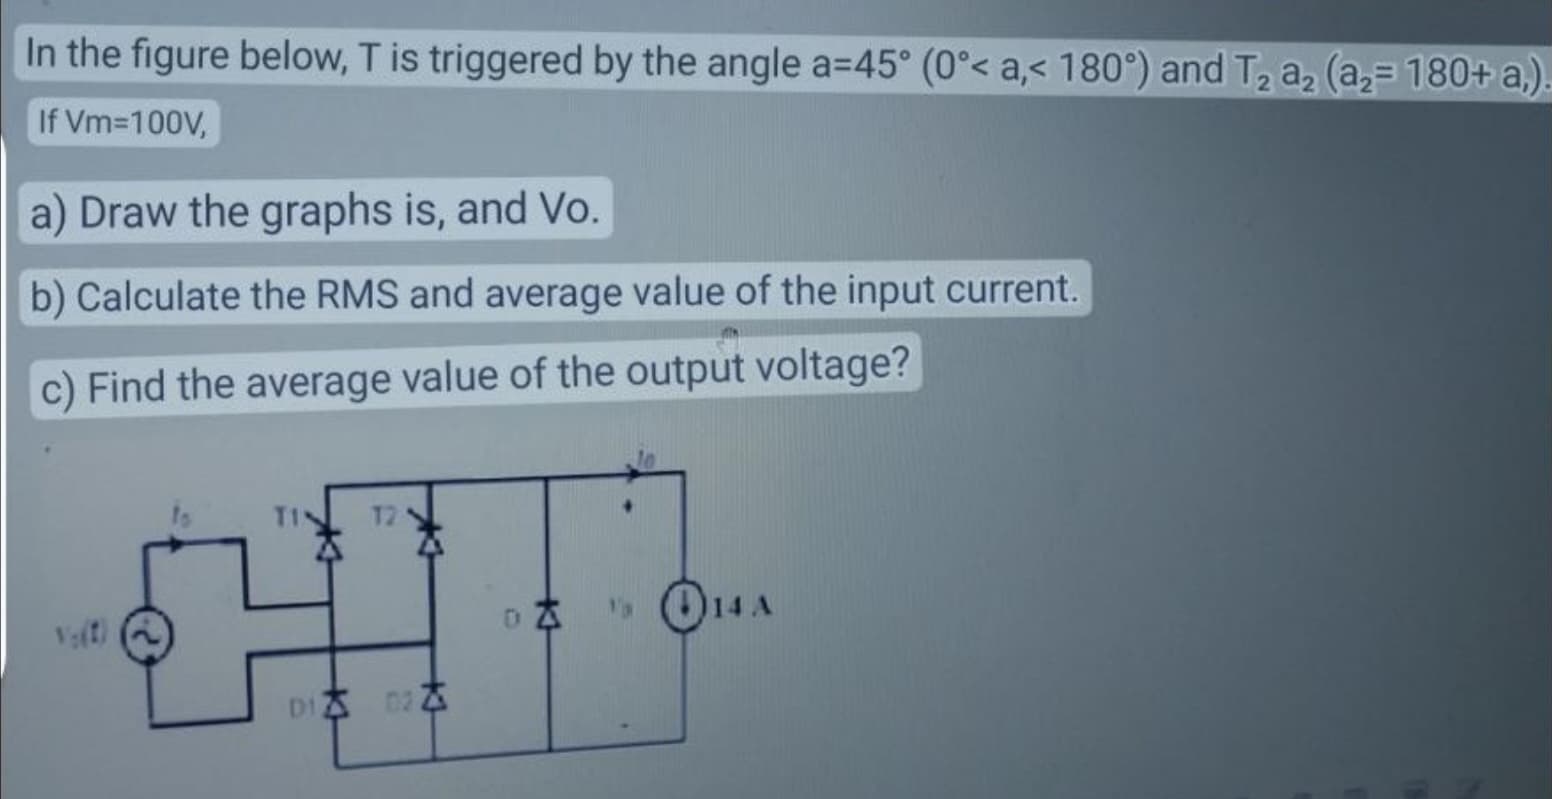 In the figure below, T is triggered by the angle a=45° (0°< a,< 180°) and T₂ a₂ (a₂- 180+ a,)
If Vm=100V,
a) Draw the graphs is, and Vo.
b) Calculate the RMS and average value of the input current.
c) Find the average value of the output voltage?
12
D1 02
DZ